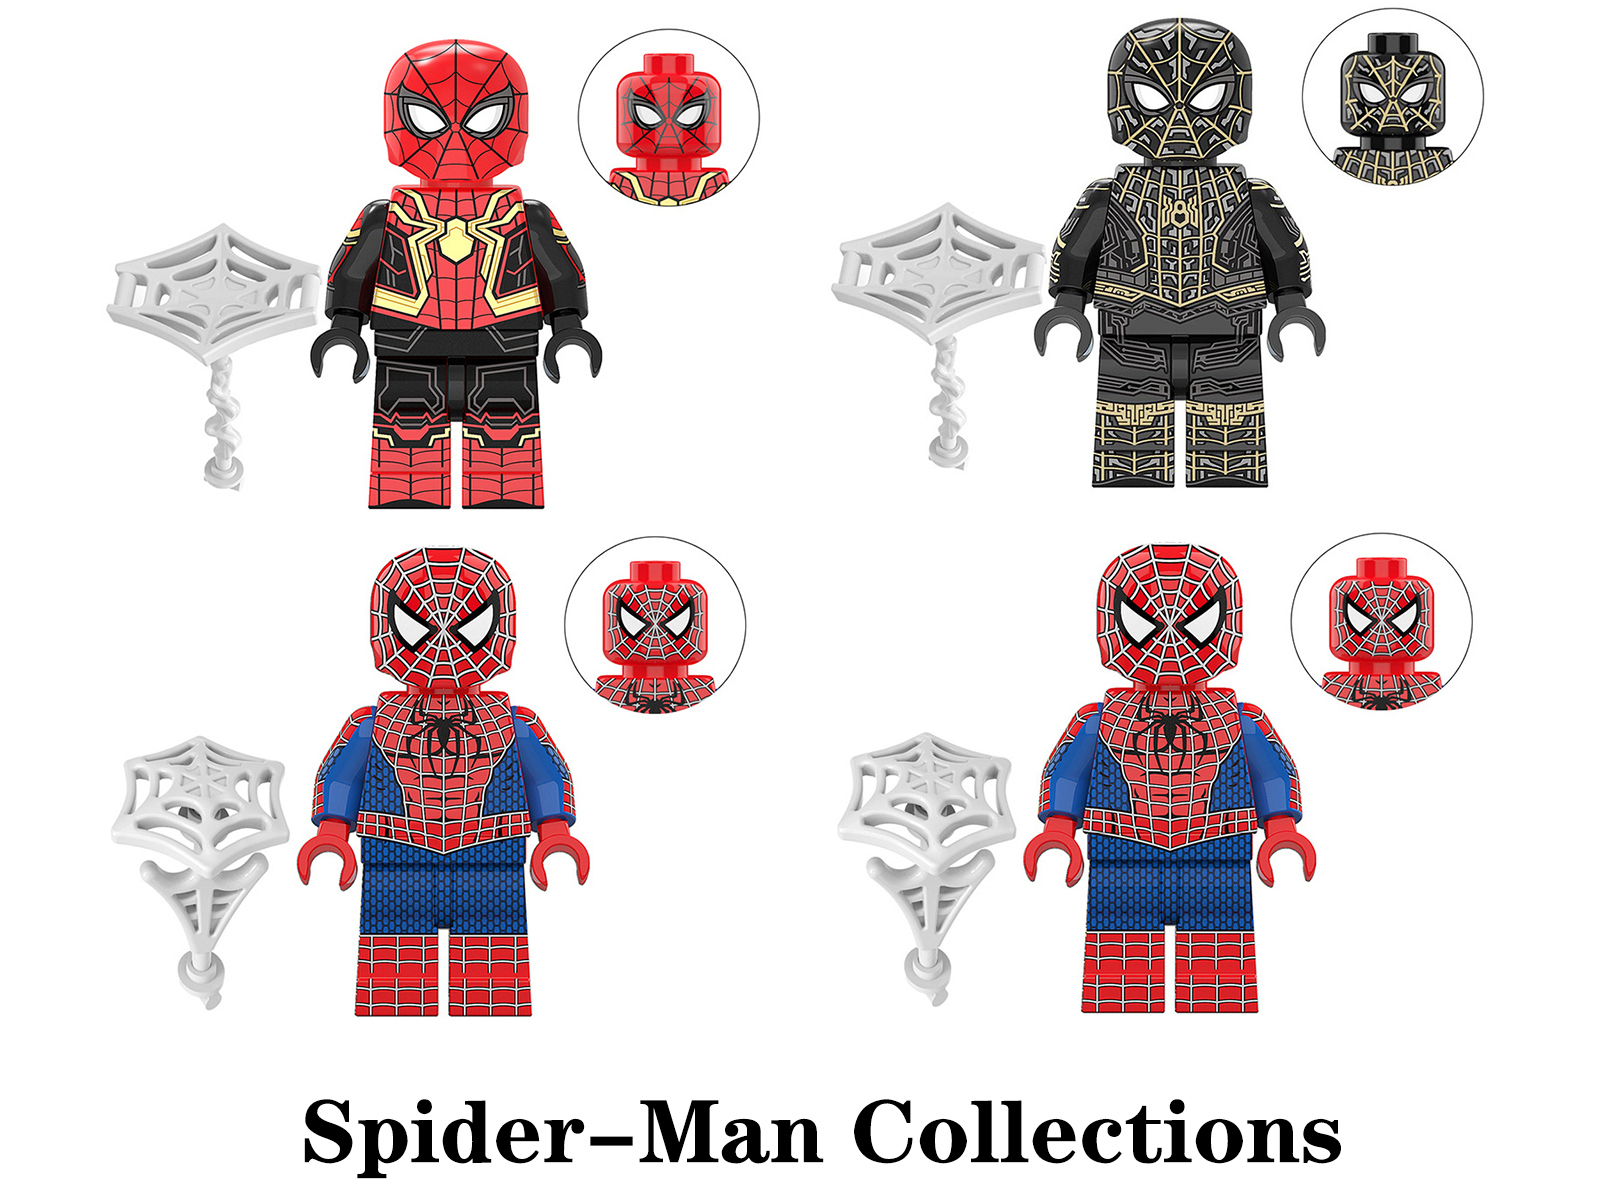 The Amazing Spider-Man Collection 4 Minifigures for boys and girls